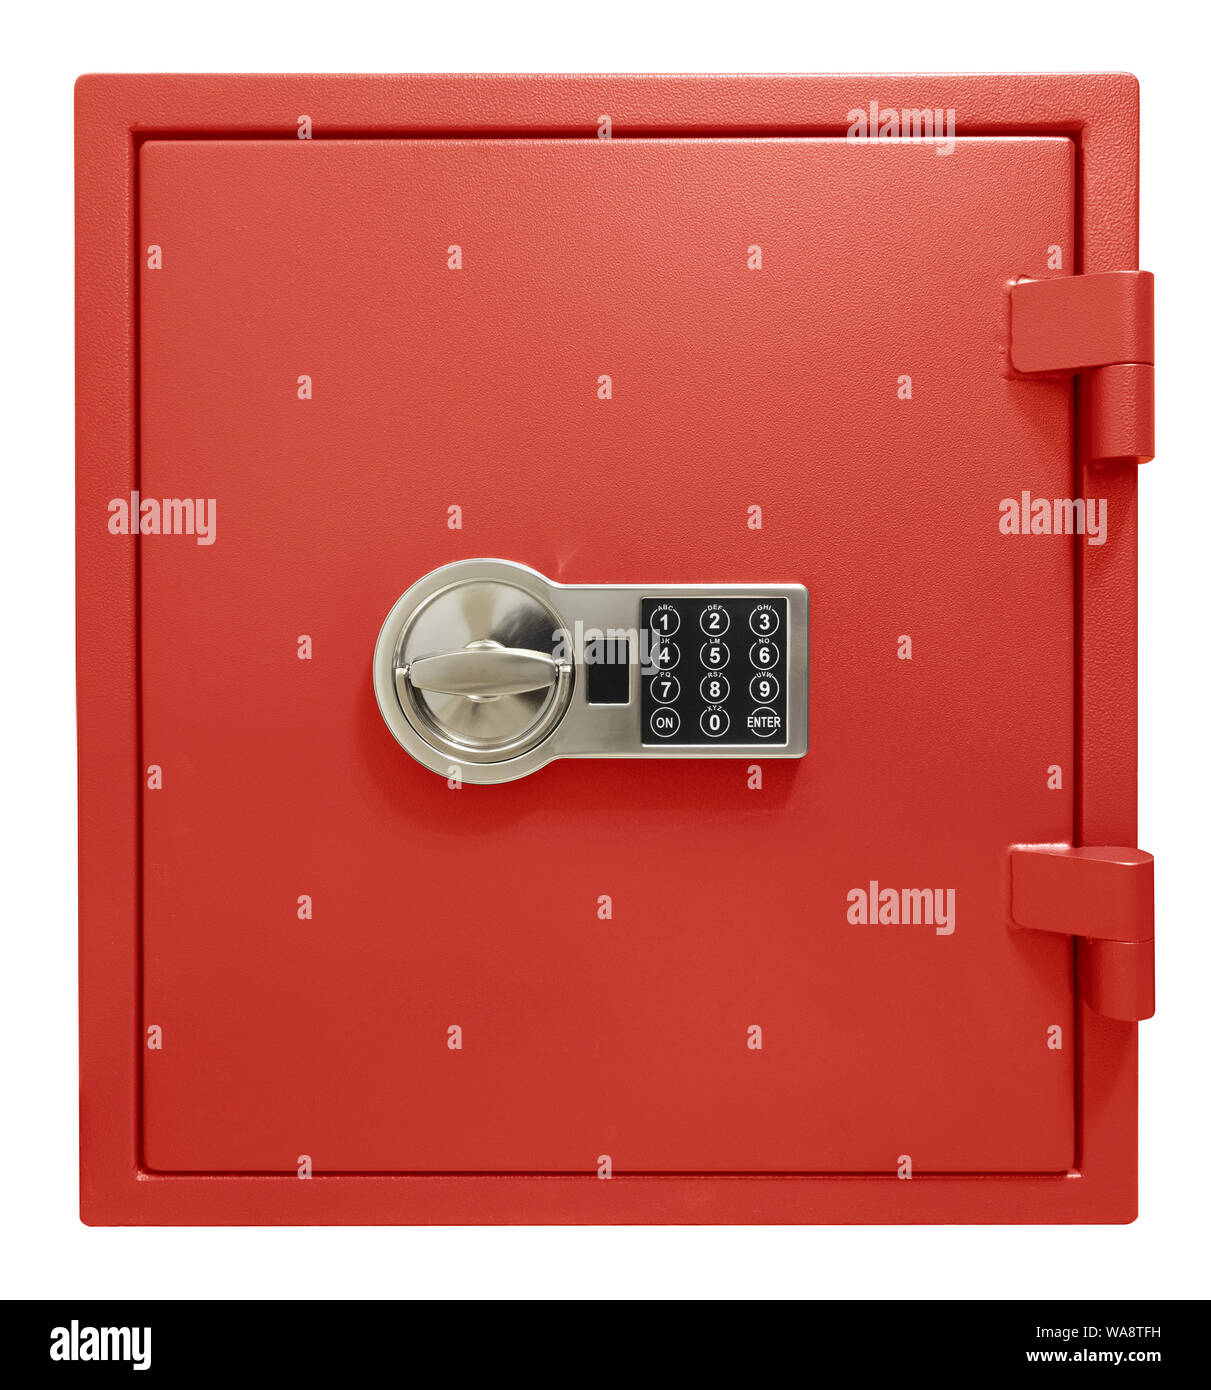 Small red safe box isolated with clipping path included Stock Photo